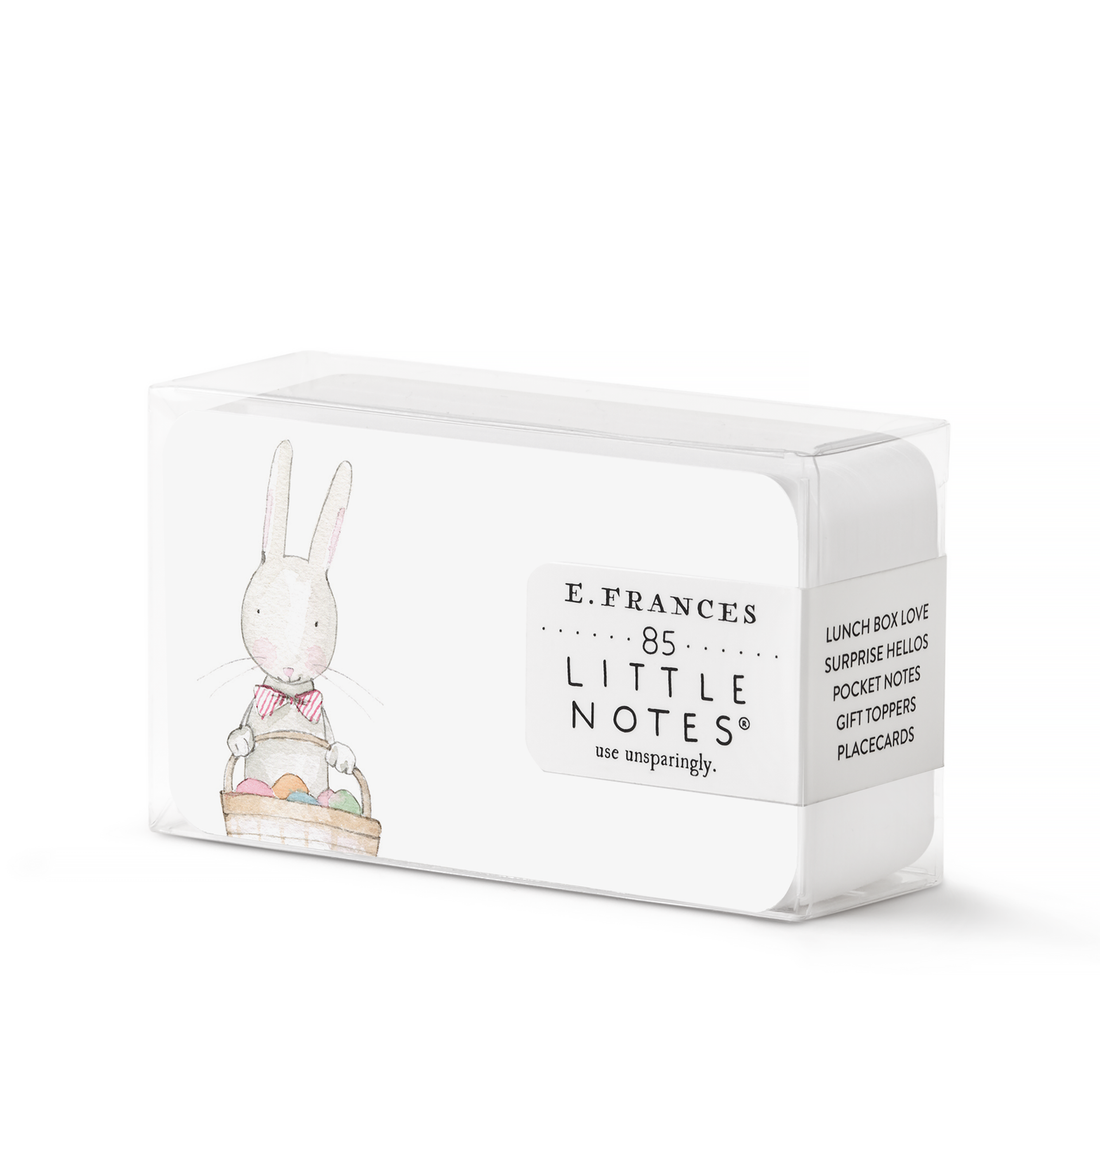 Box of Peter Rabbit Little Notes® with a bunny design, perfect as surprise notes by E. Frances.